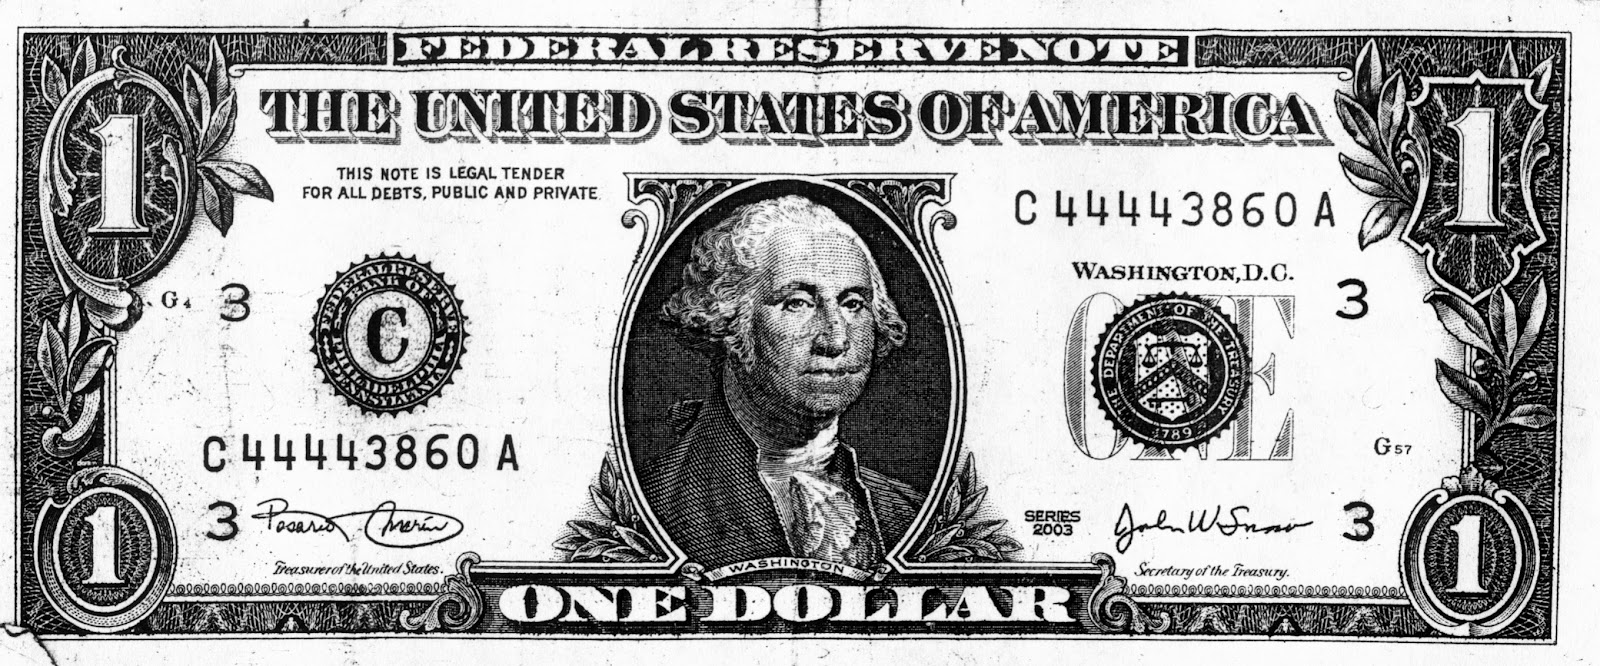 10 Black And White Photos Of 20 Dollars Images - One Dollar Bill